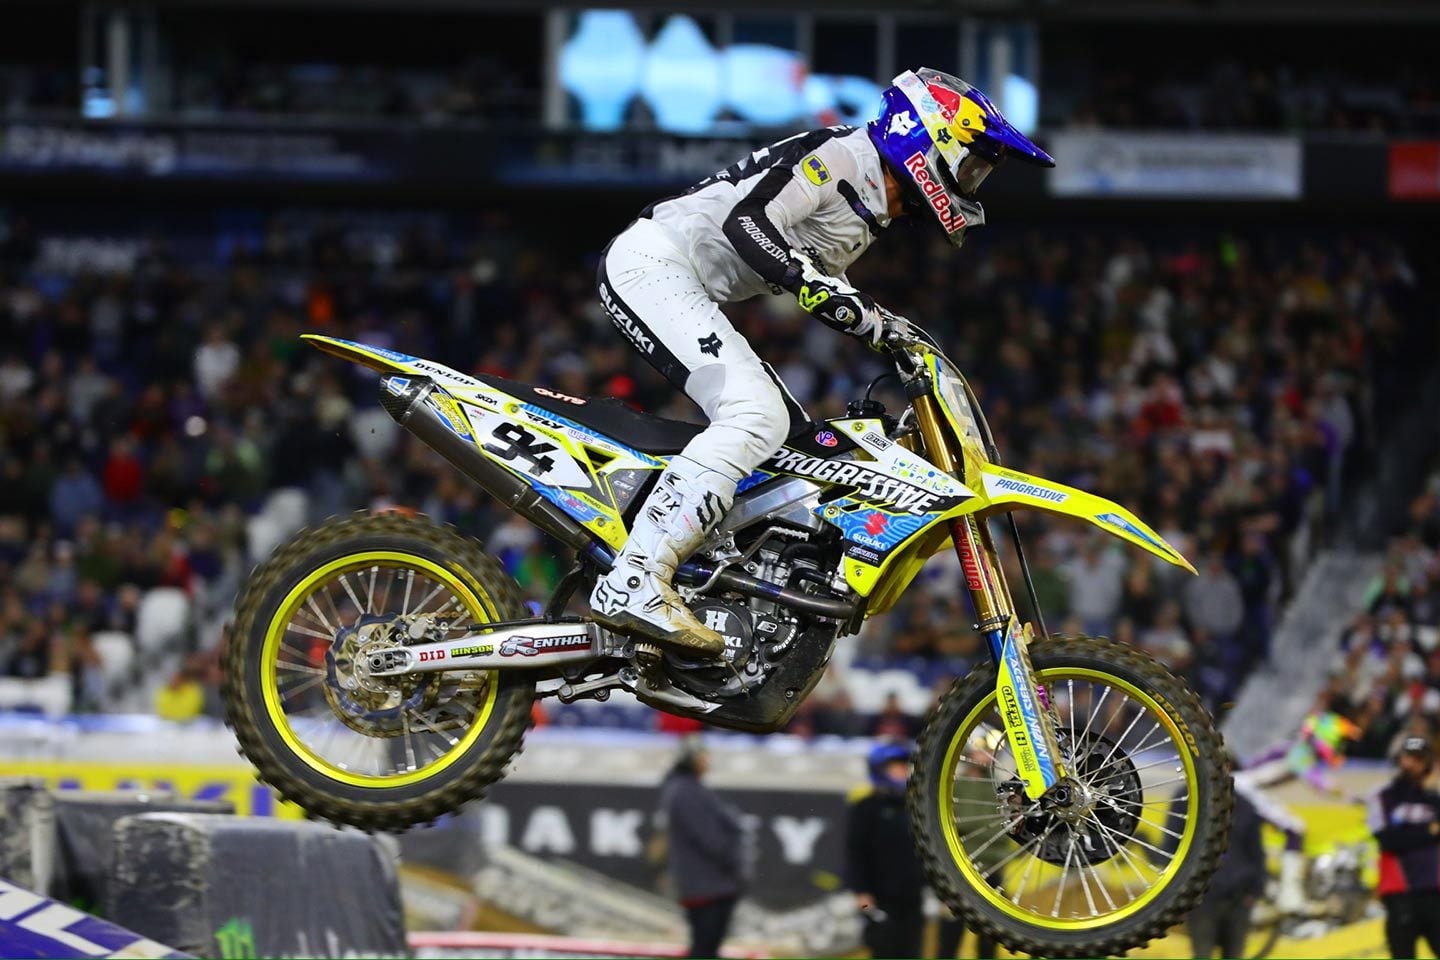 A shock failure had Ken Roczen going for a wild ride in the whoops at the Nashville Supercross this past weekend. Injuries sustained in the crash have ended his 2024 AMA Supercross campaign.